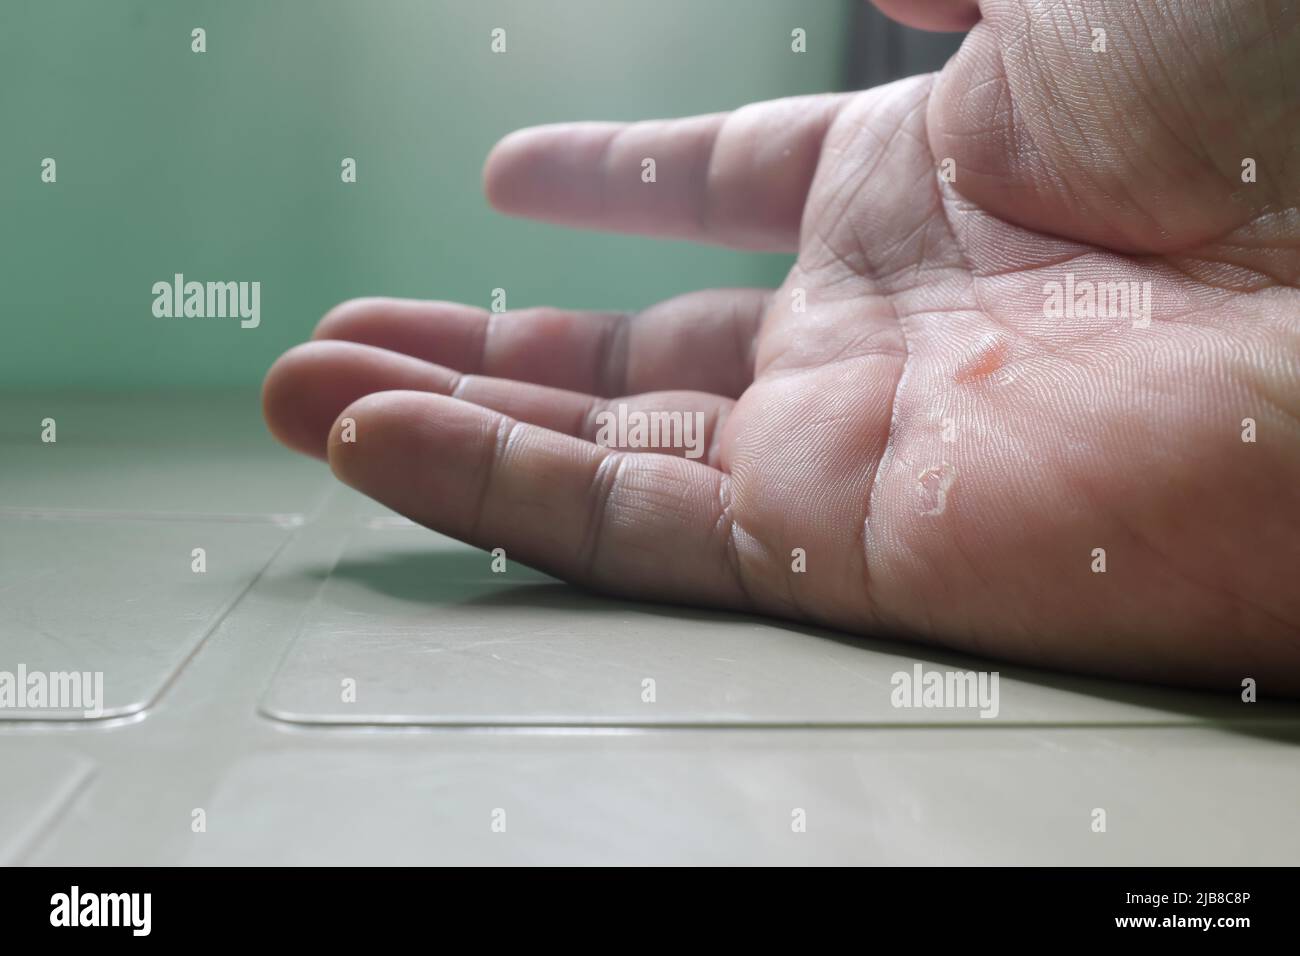 https://c8.alamy.com/comp/2JB8C8P/selective-focus-of-human-male-hand-with-blisters-caused-by-heavy-work-burn-and-friction-2JB8C8P.jpg